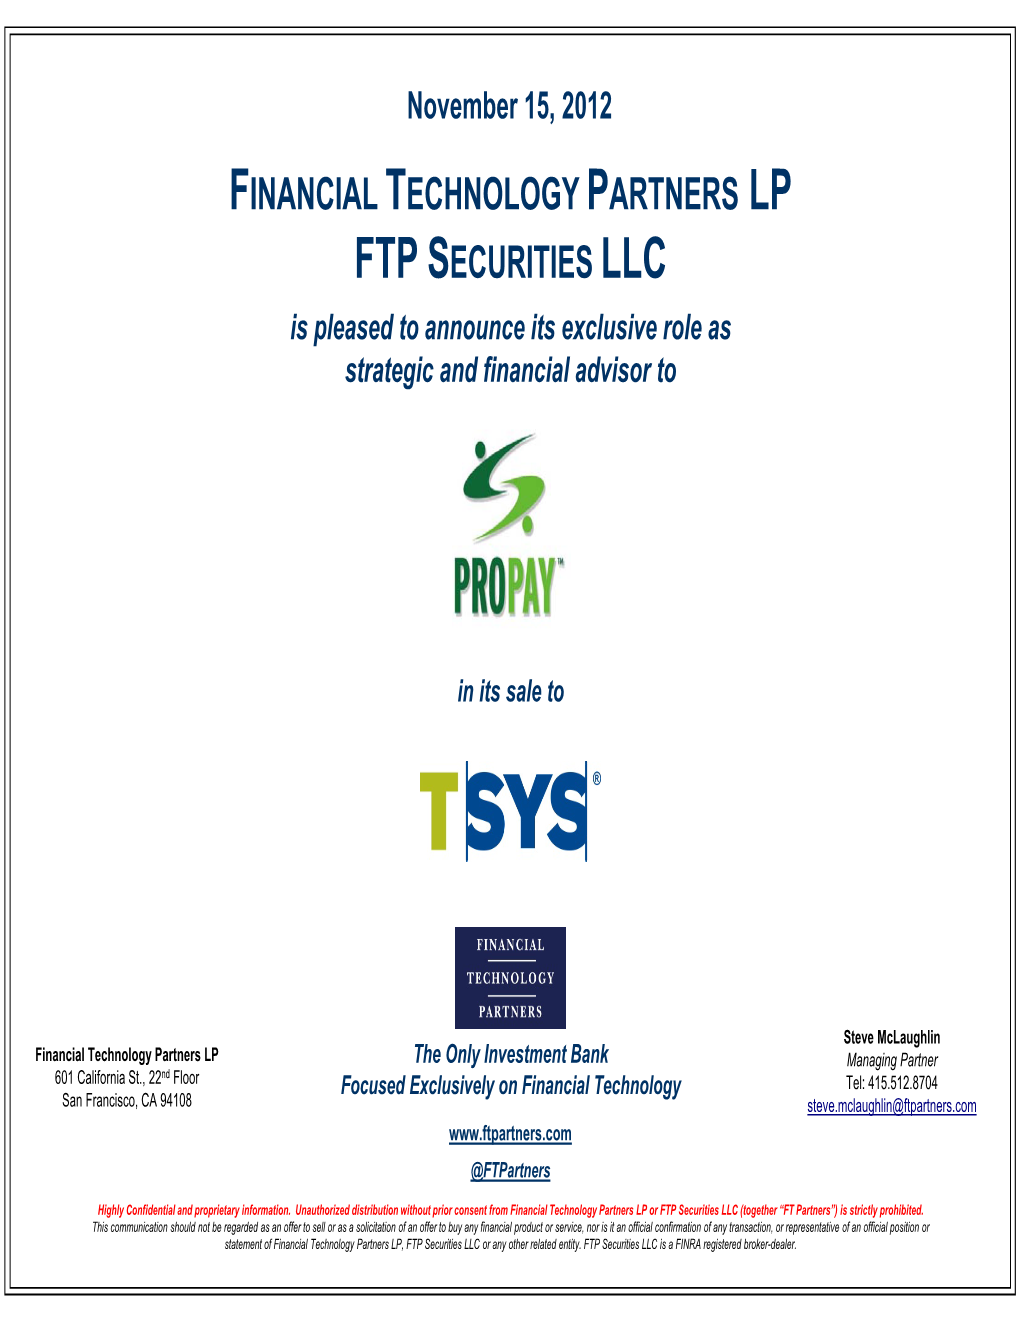 FINANCIAL TECHNOLOGY PARTNERS LP FTP SECURITIES LLC Is Pleased to Announce Its Exclusive Role As Strategic and Financial Advisor To